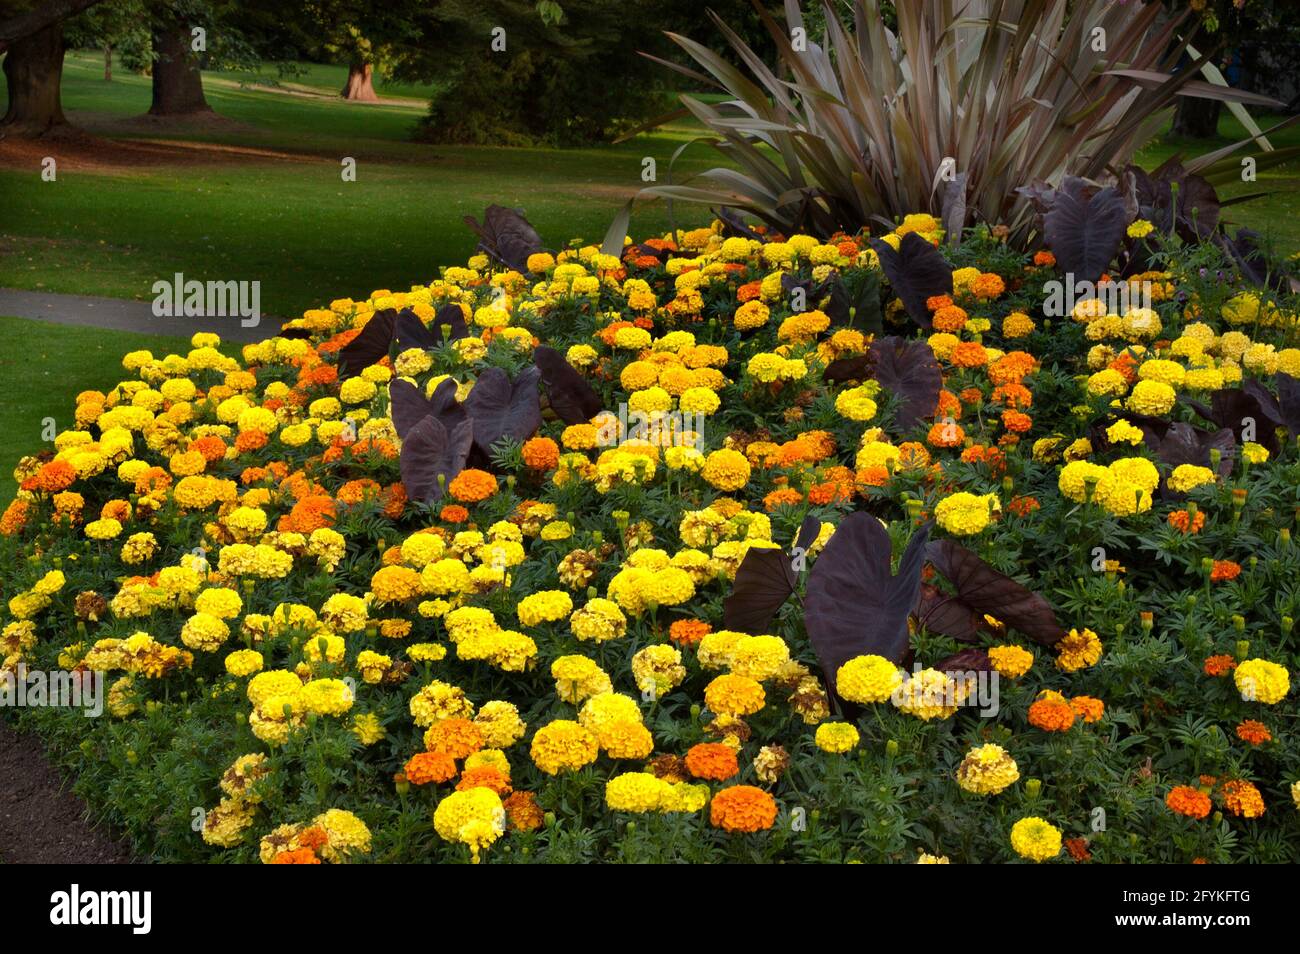 Mixed marigolds ( Tagetes patula)  in garden with Colocasia and Cordyline, mass planting Stock Photo